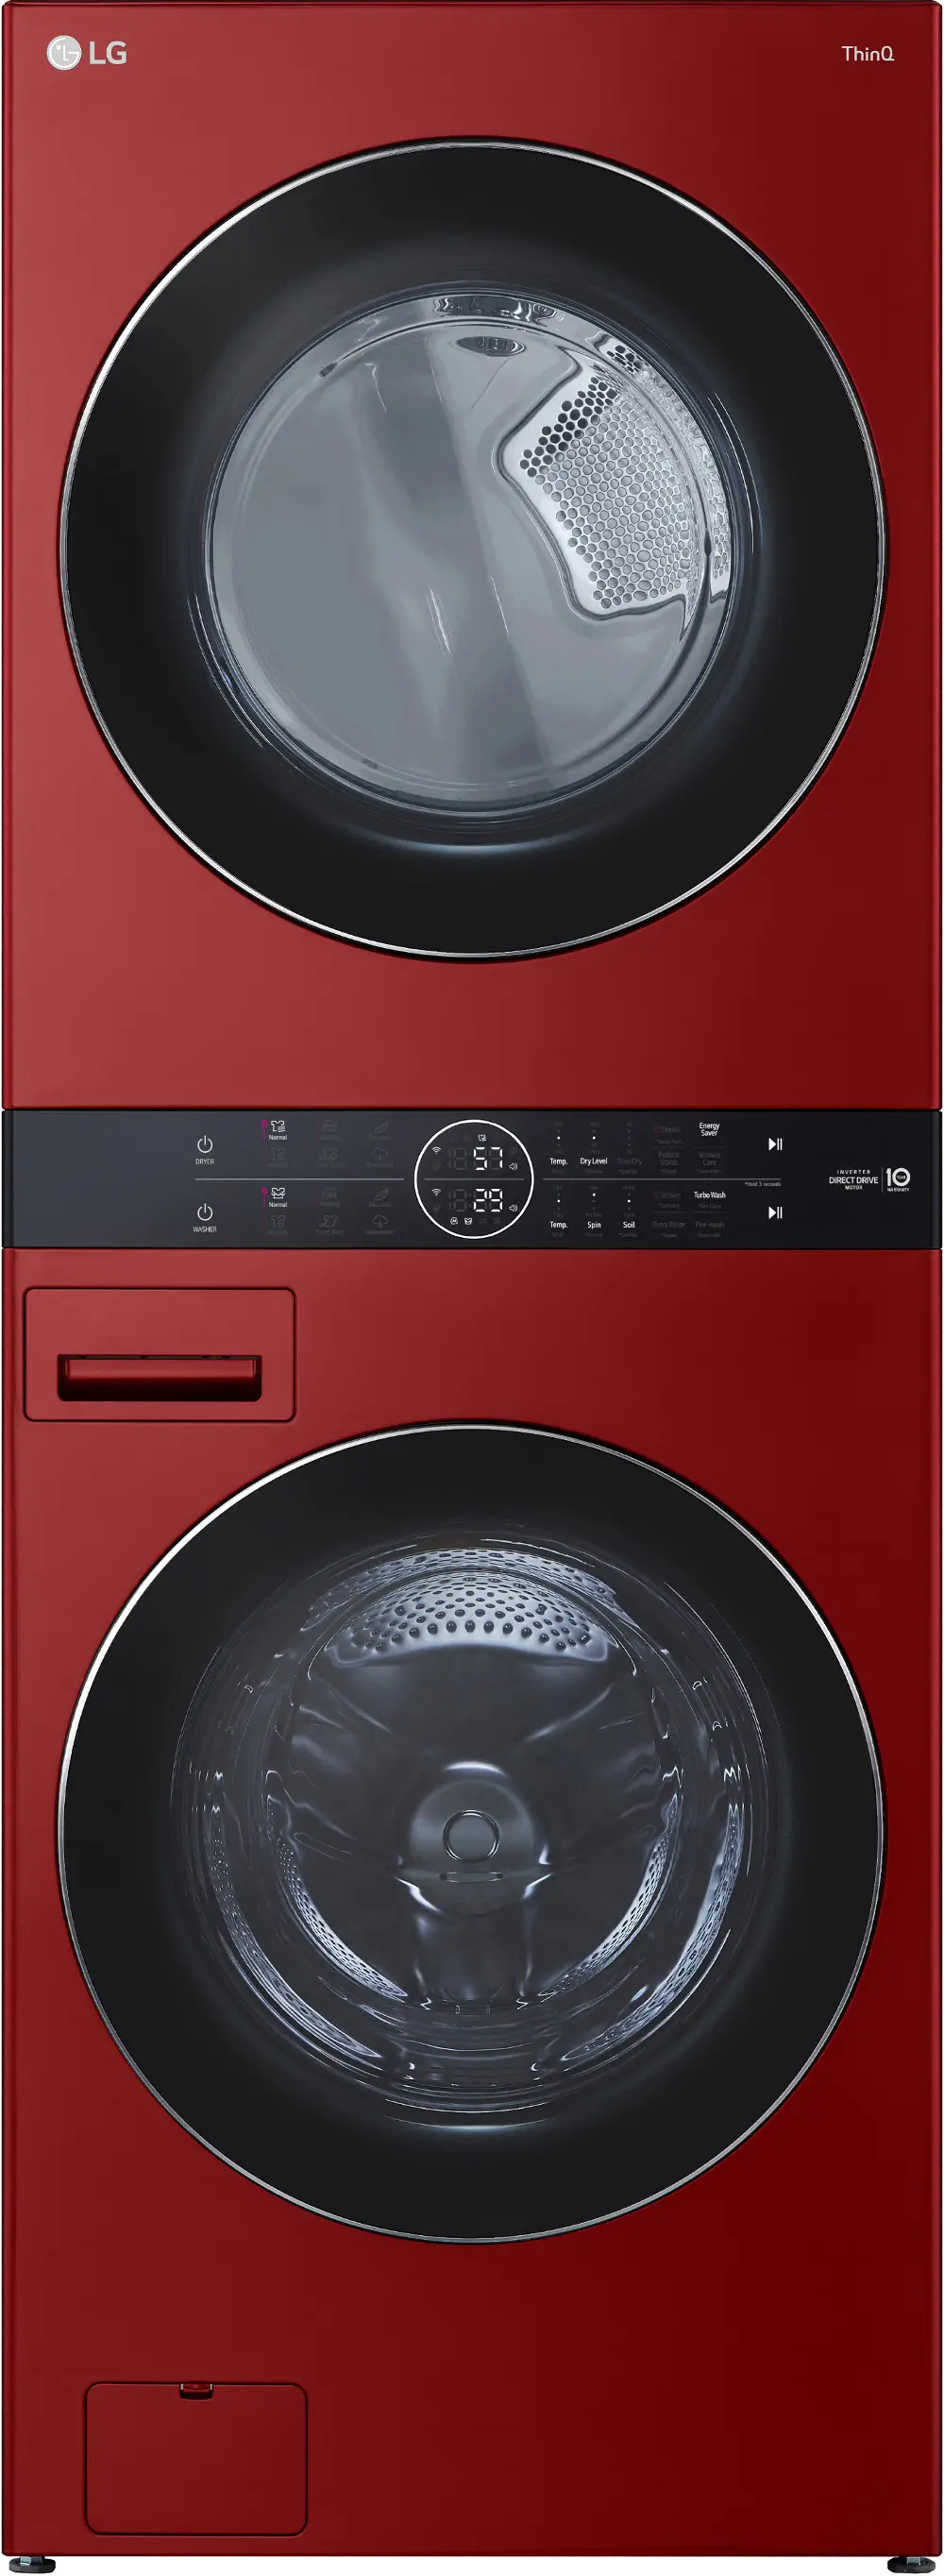 WKGX201HRA LG WashTower Gas Washer and Dryer Set - Candy Apple Red-1